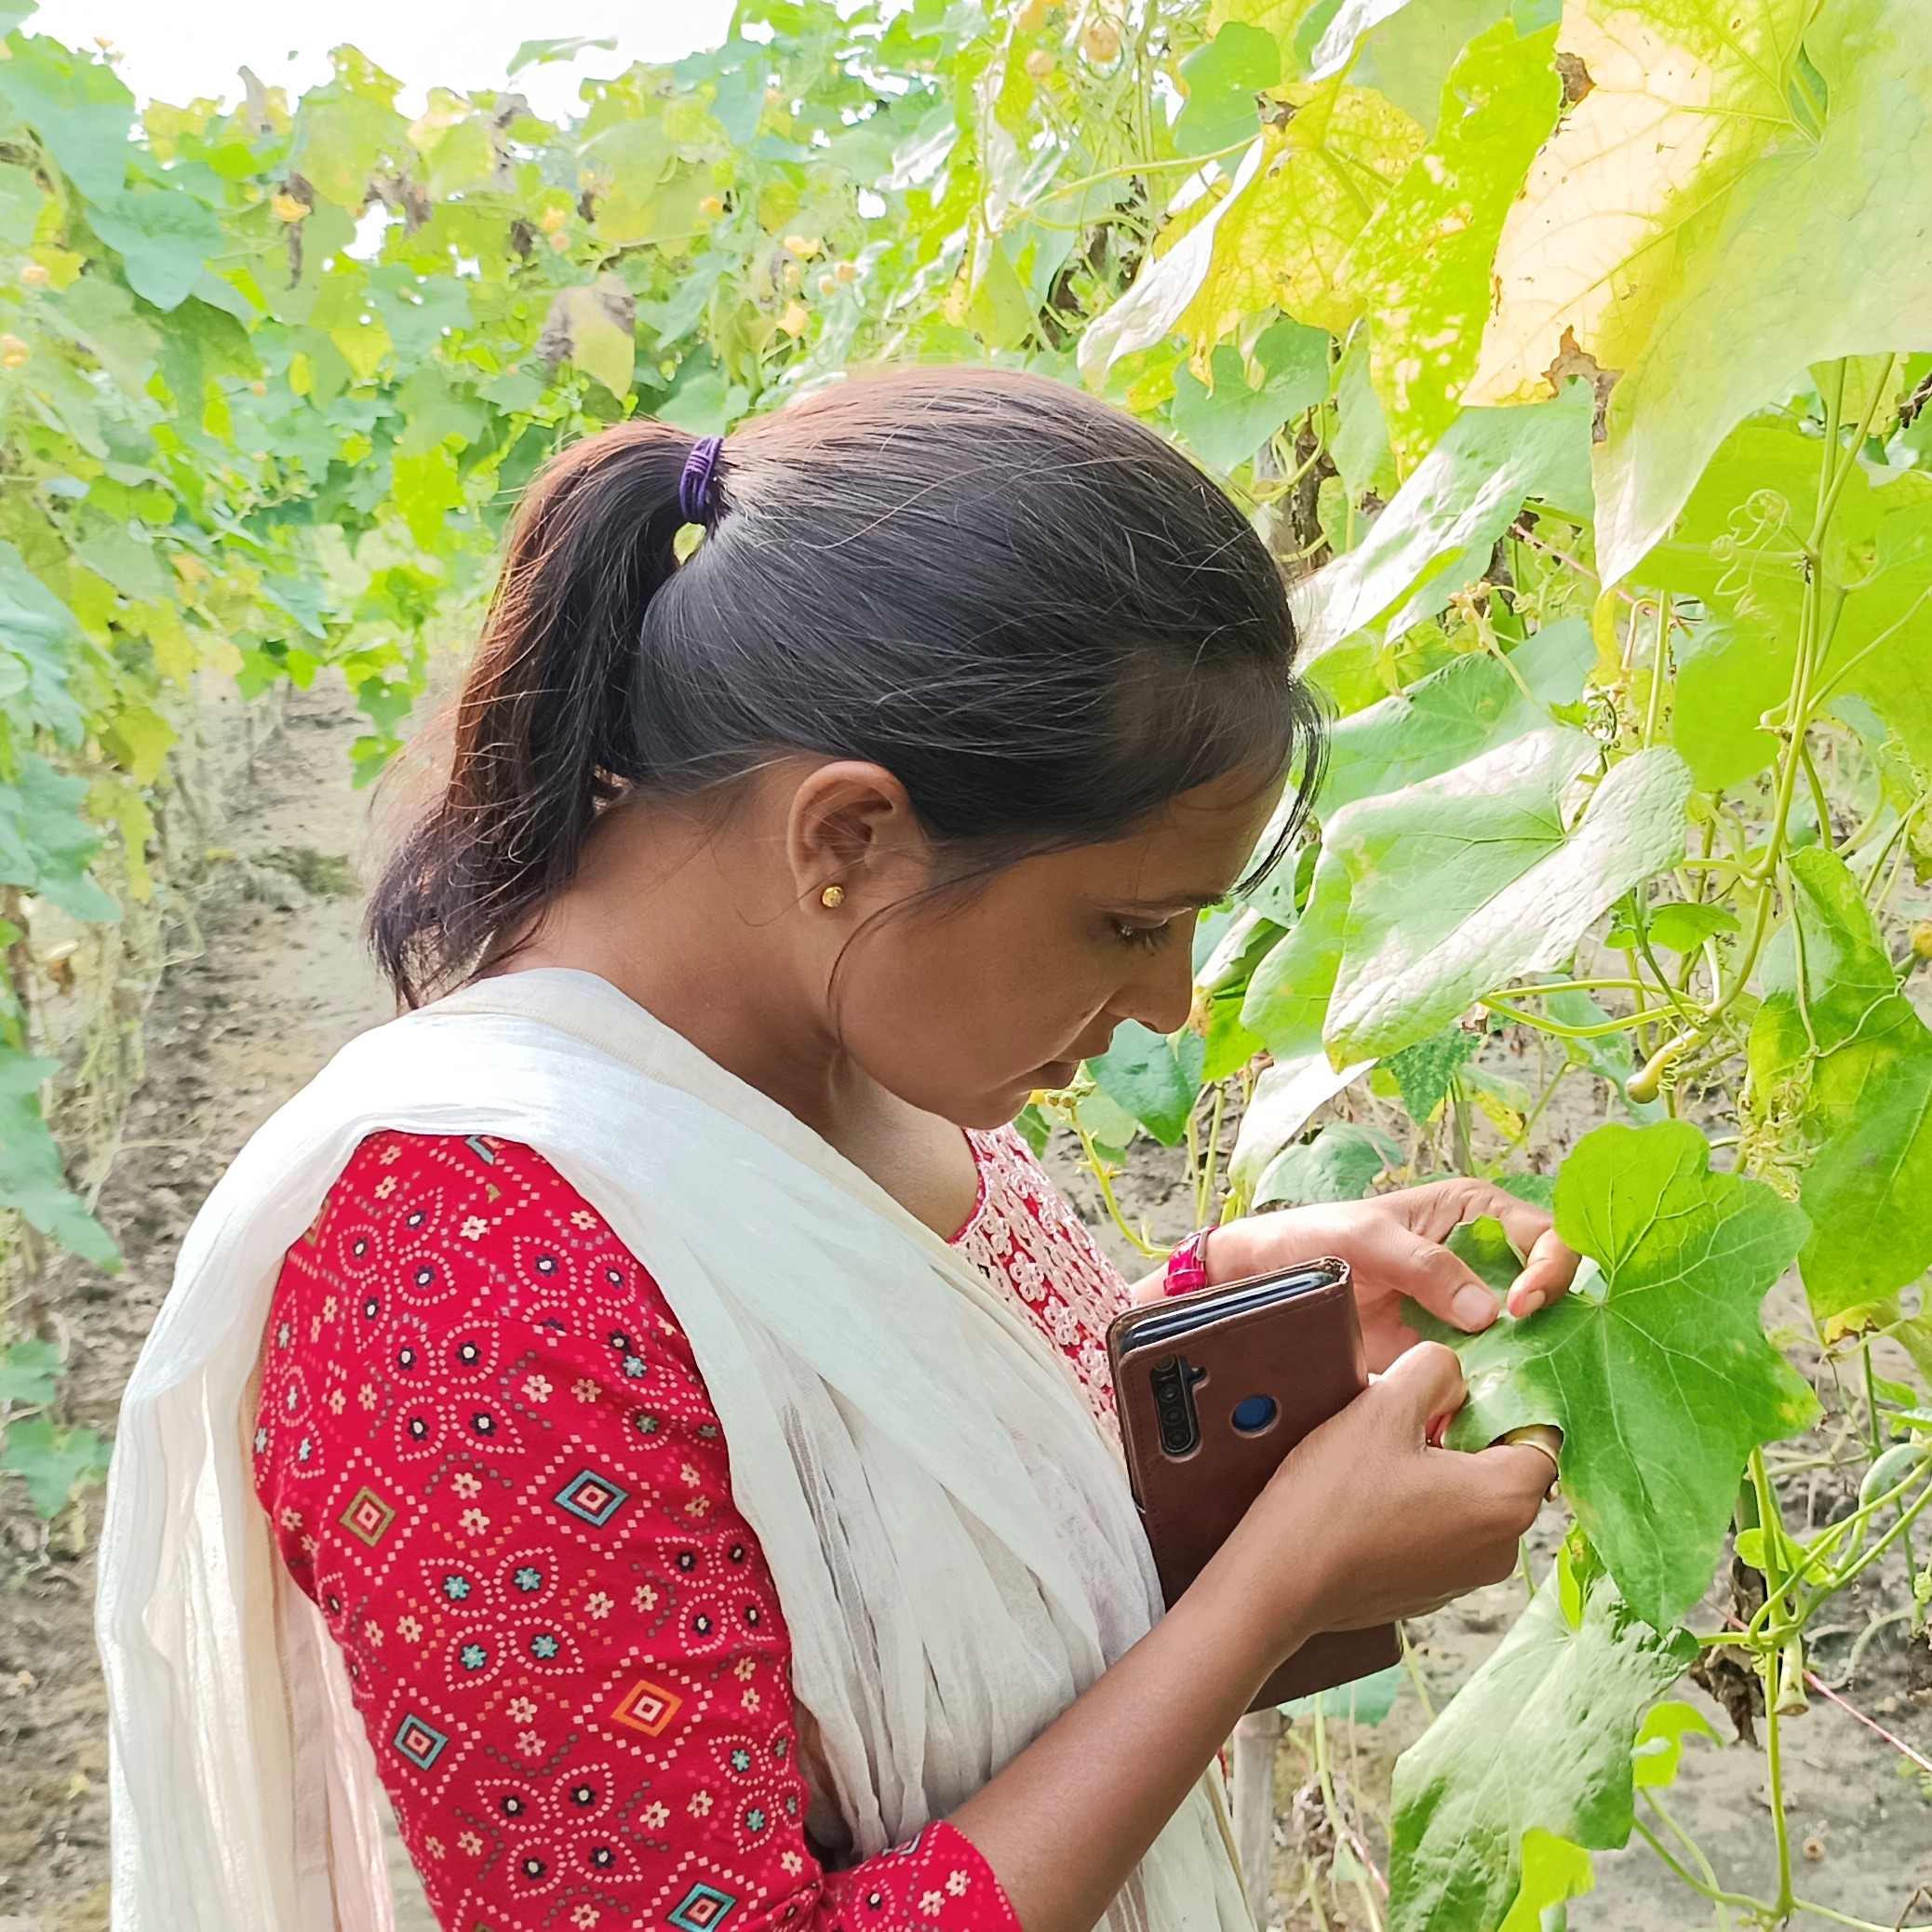 Komal Yadav inspects a leaf for pests and diseases.